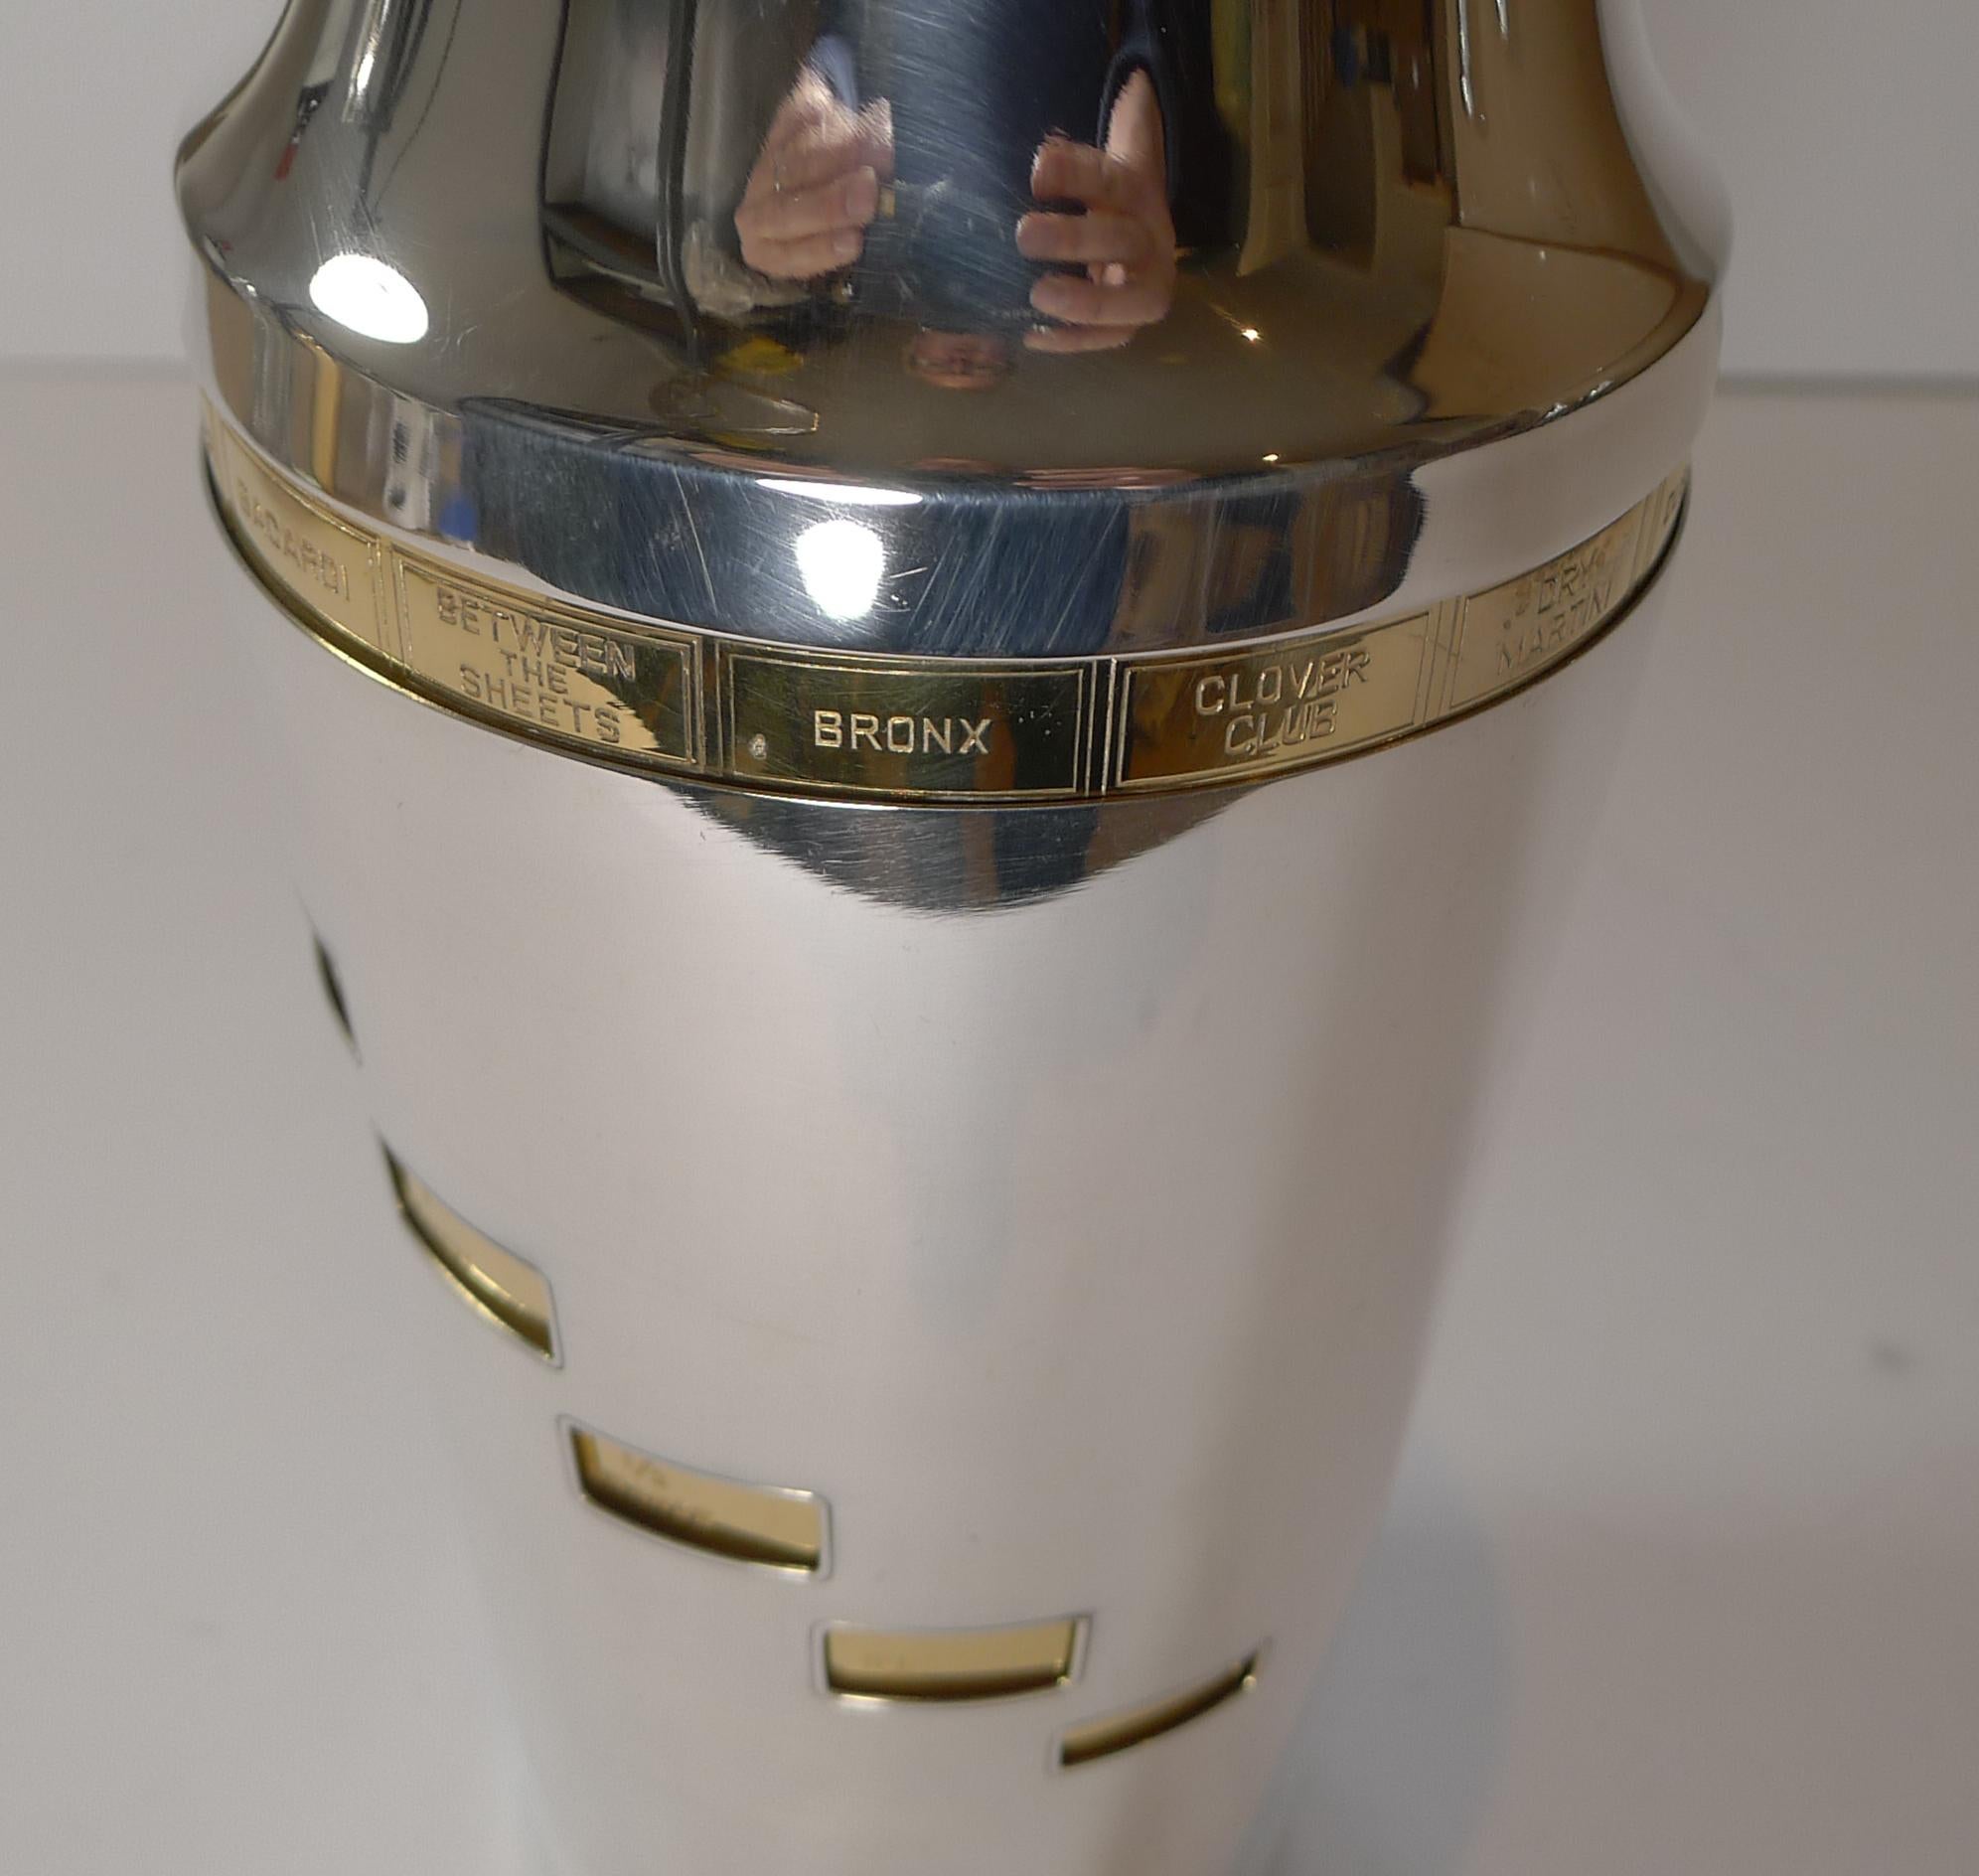 A magnificent original vintage 1930's recipe cocktail shaker just back from our silversmith having had all the gold and silver plating professionally restored and polished to create an outstanding example.

The shaker incorporates a gilded inner